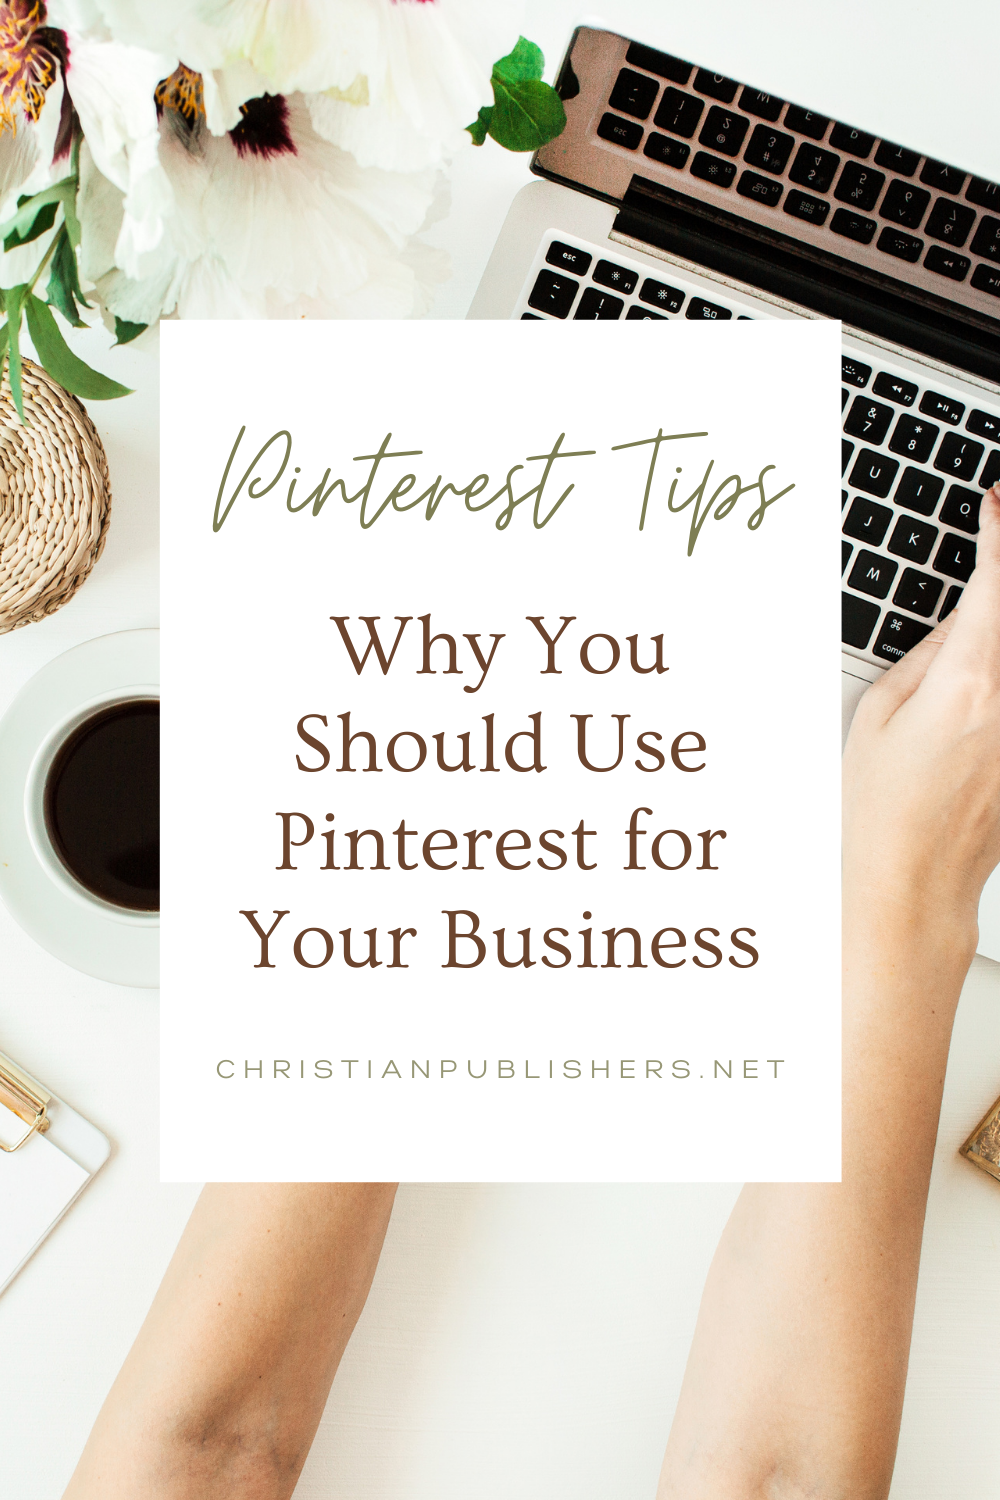 Why You Should Use Pinterest for Your Business